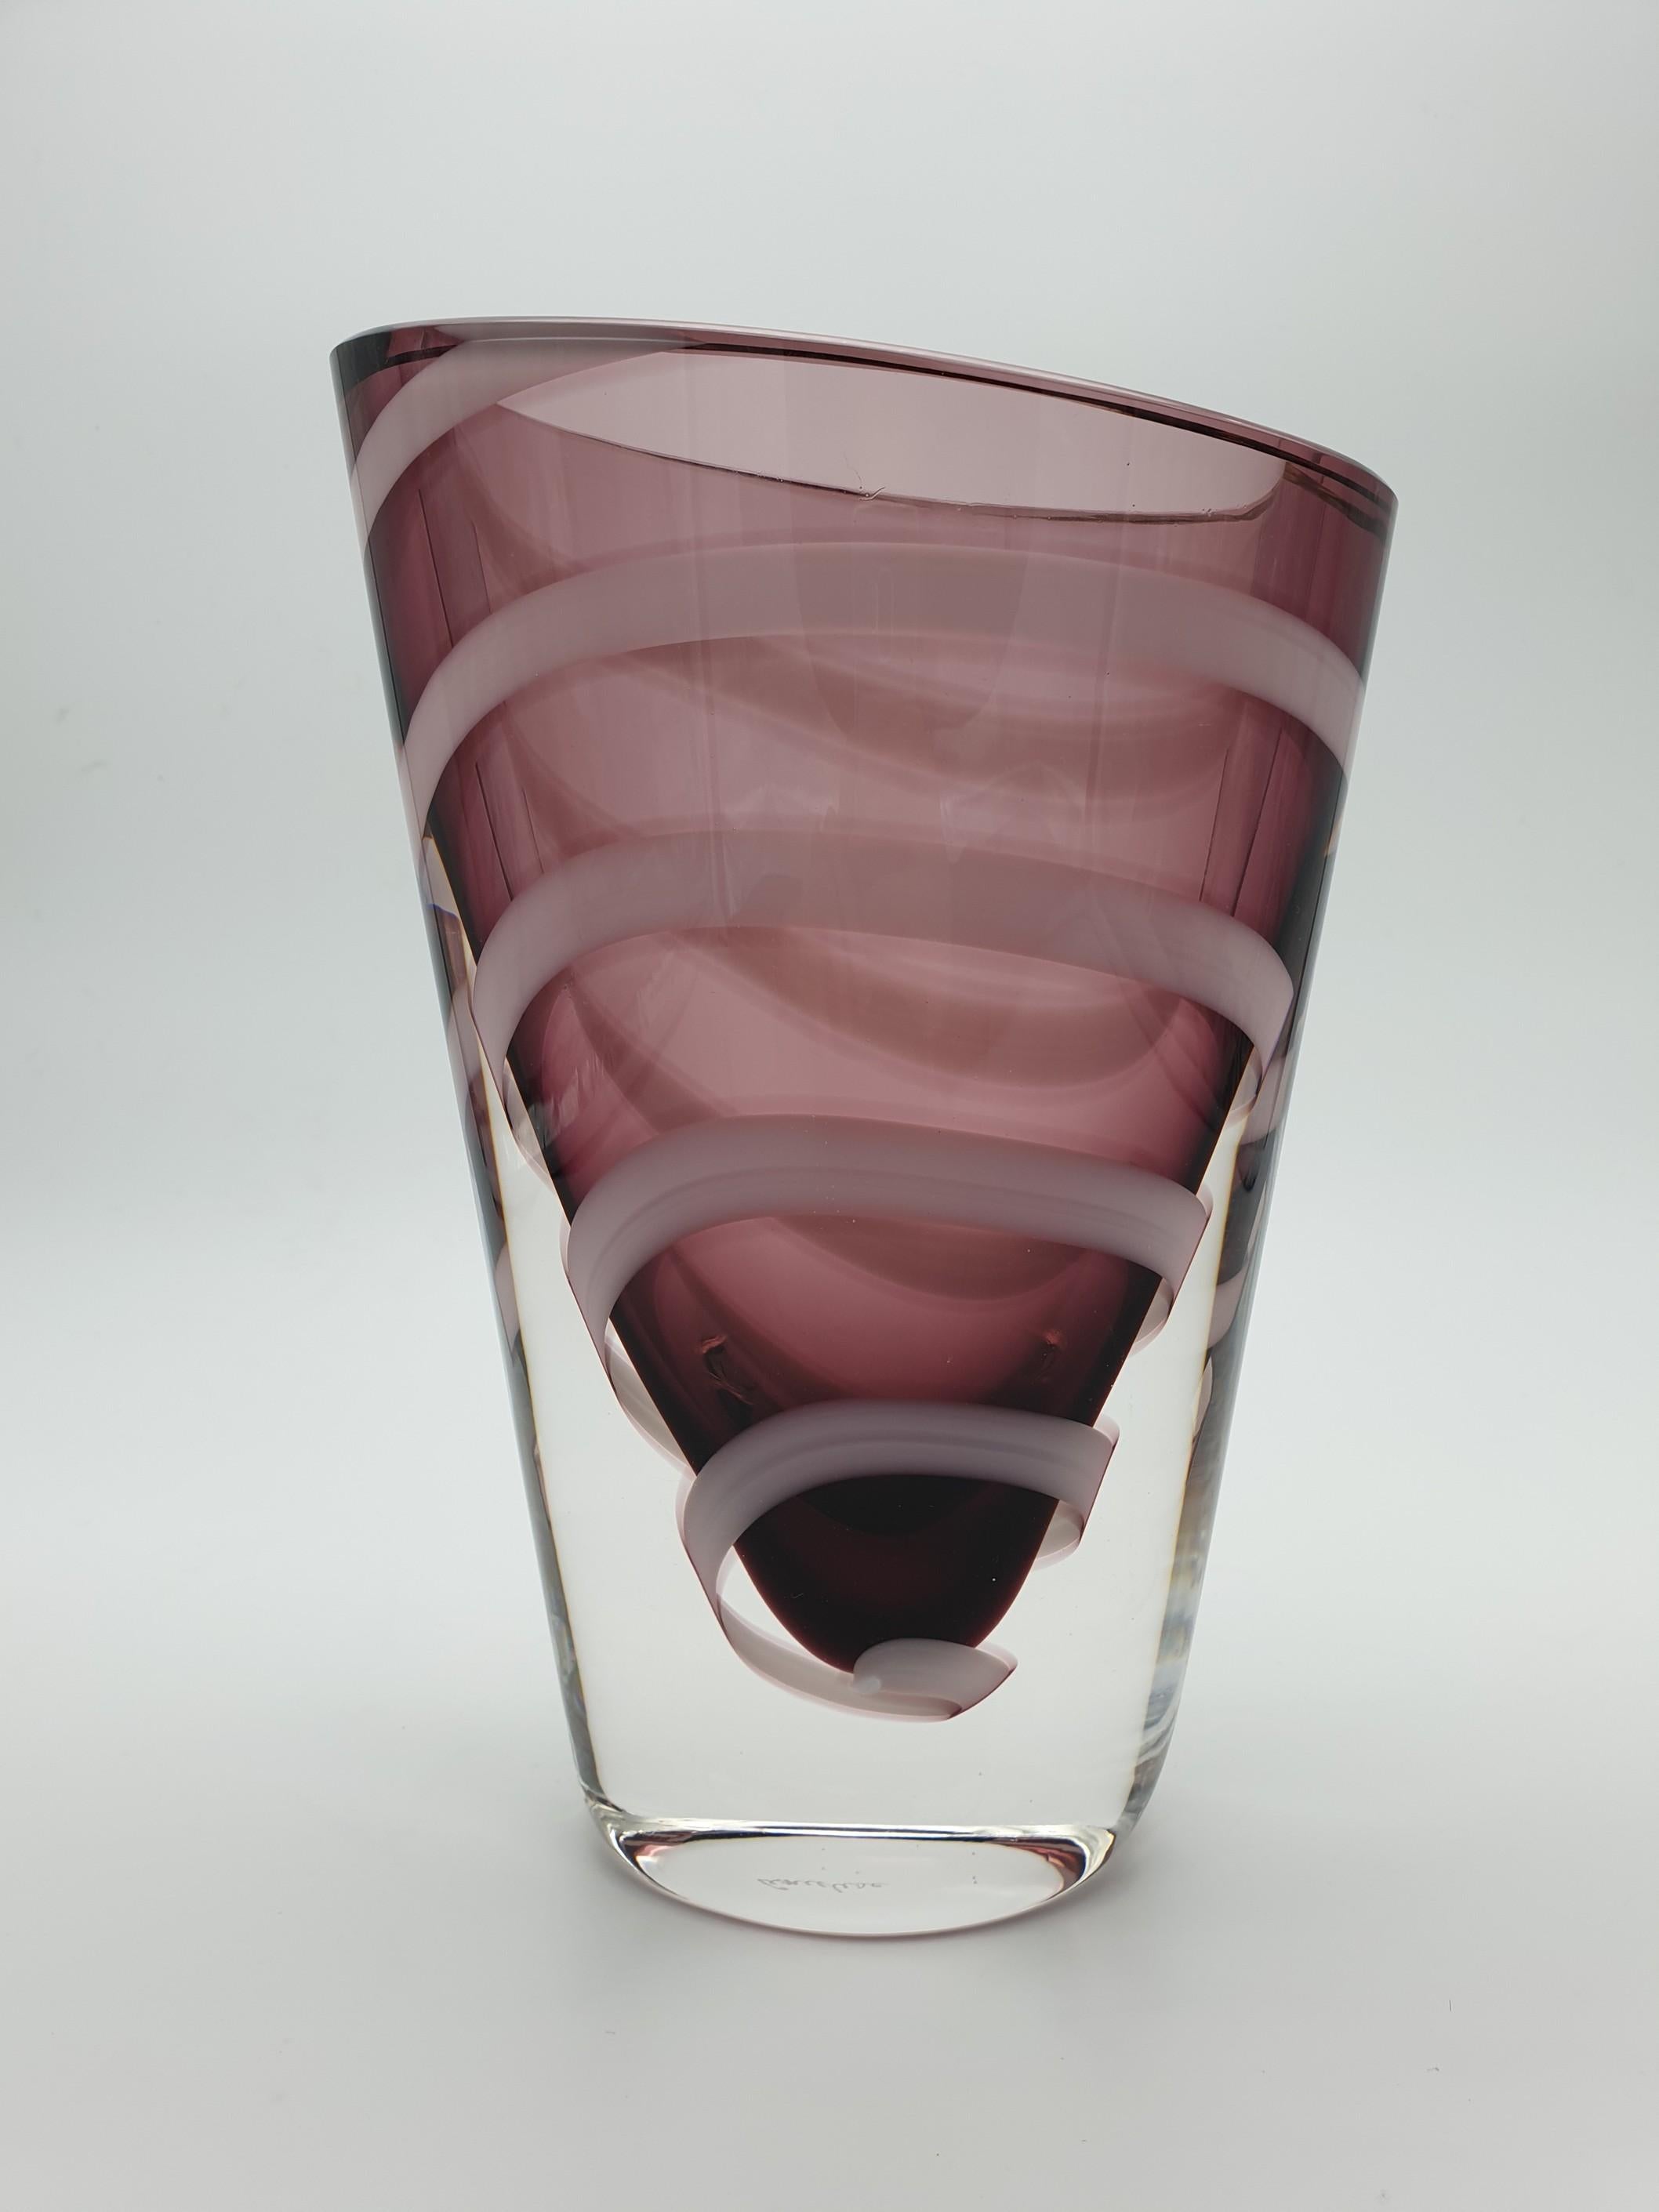 Hand-Crafted Contemporary Solid Murano Glass Vase by Cenedese, late 1990s For Sale